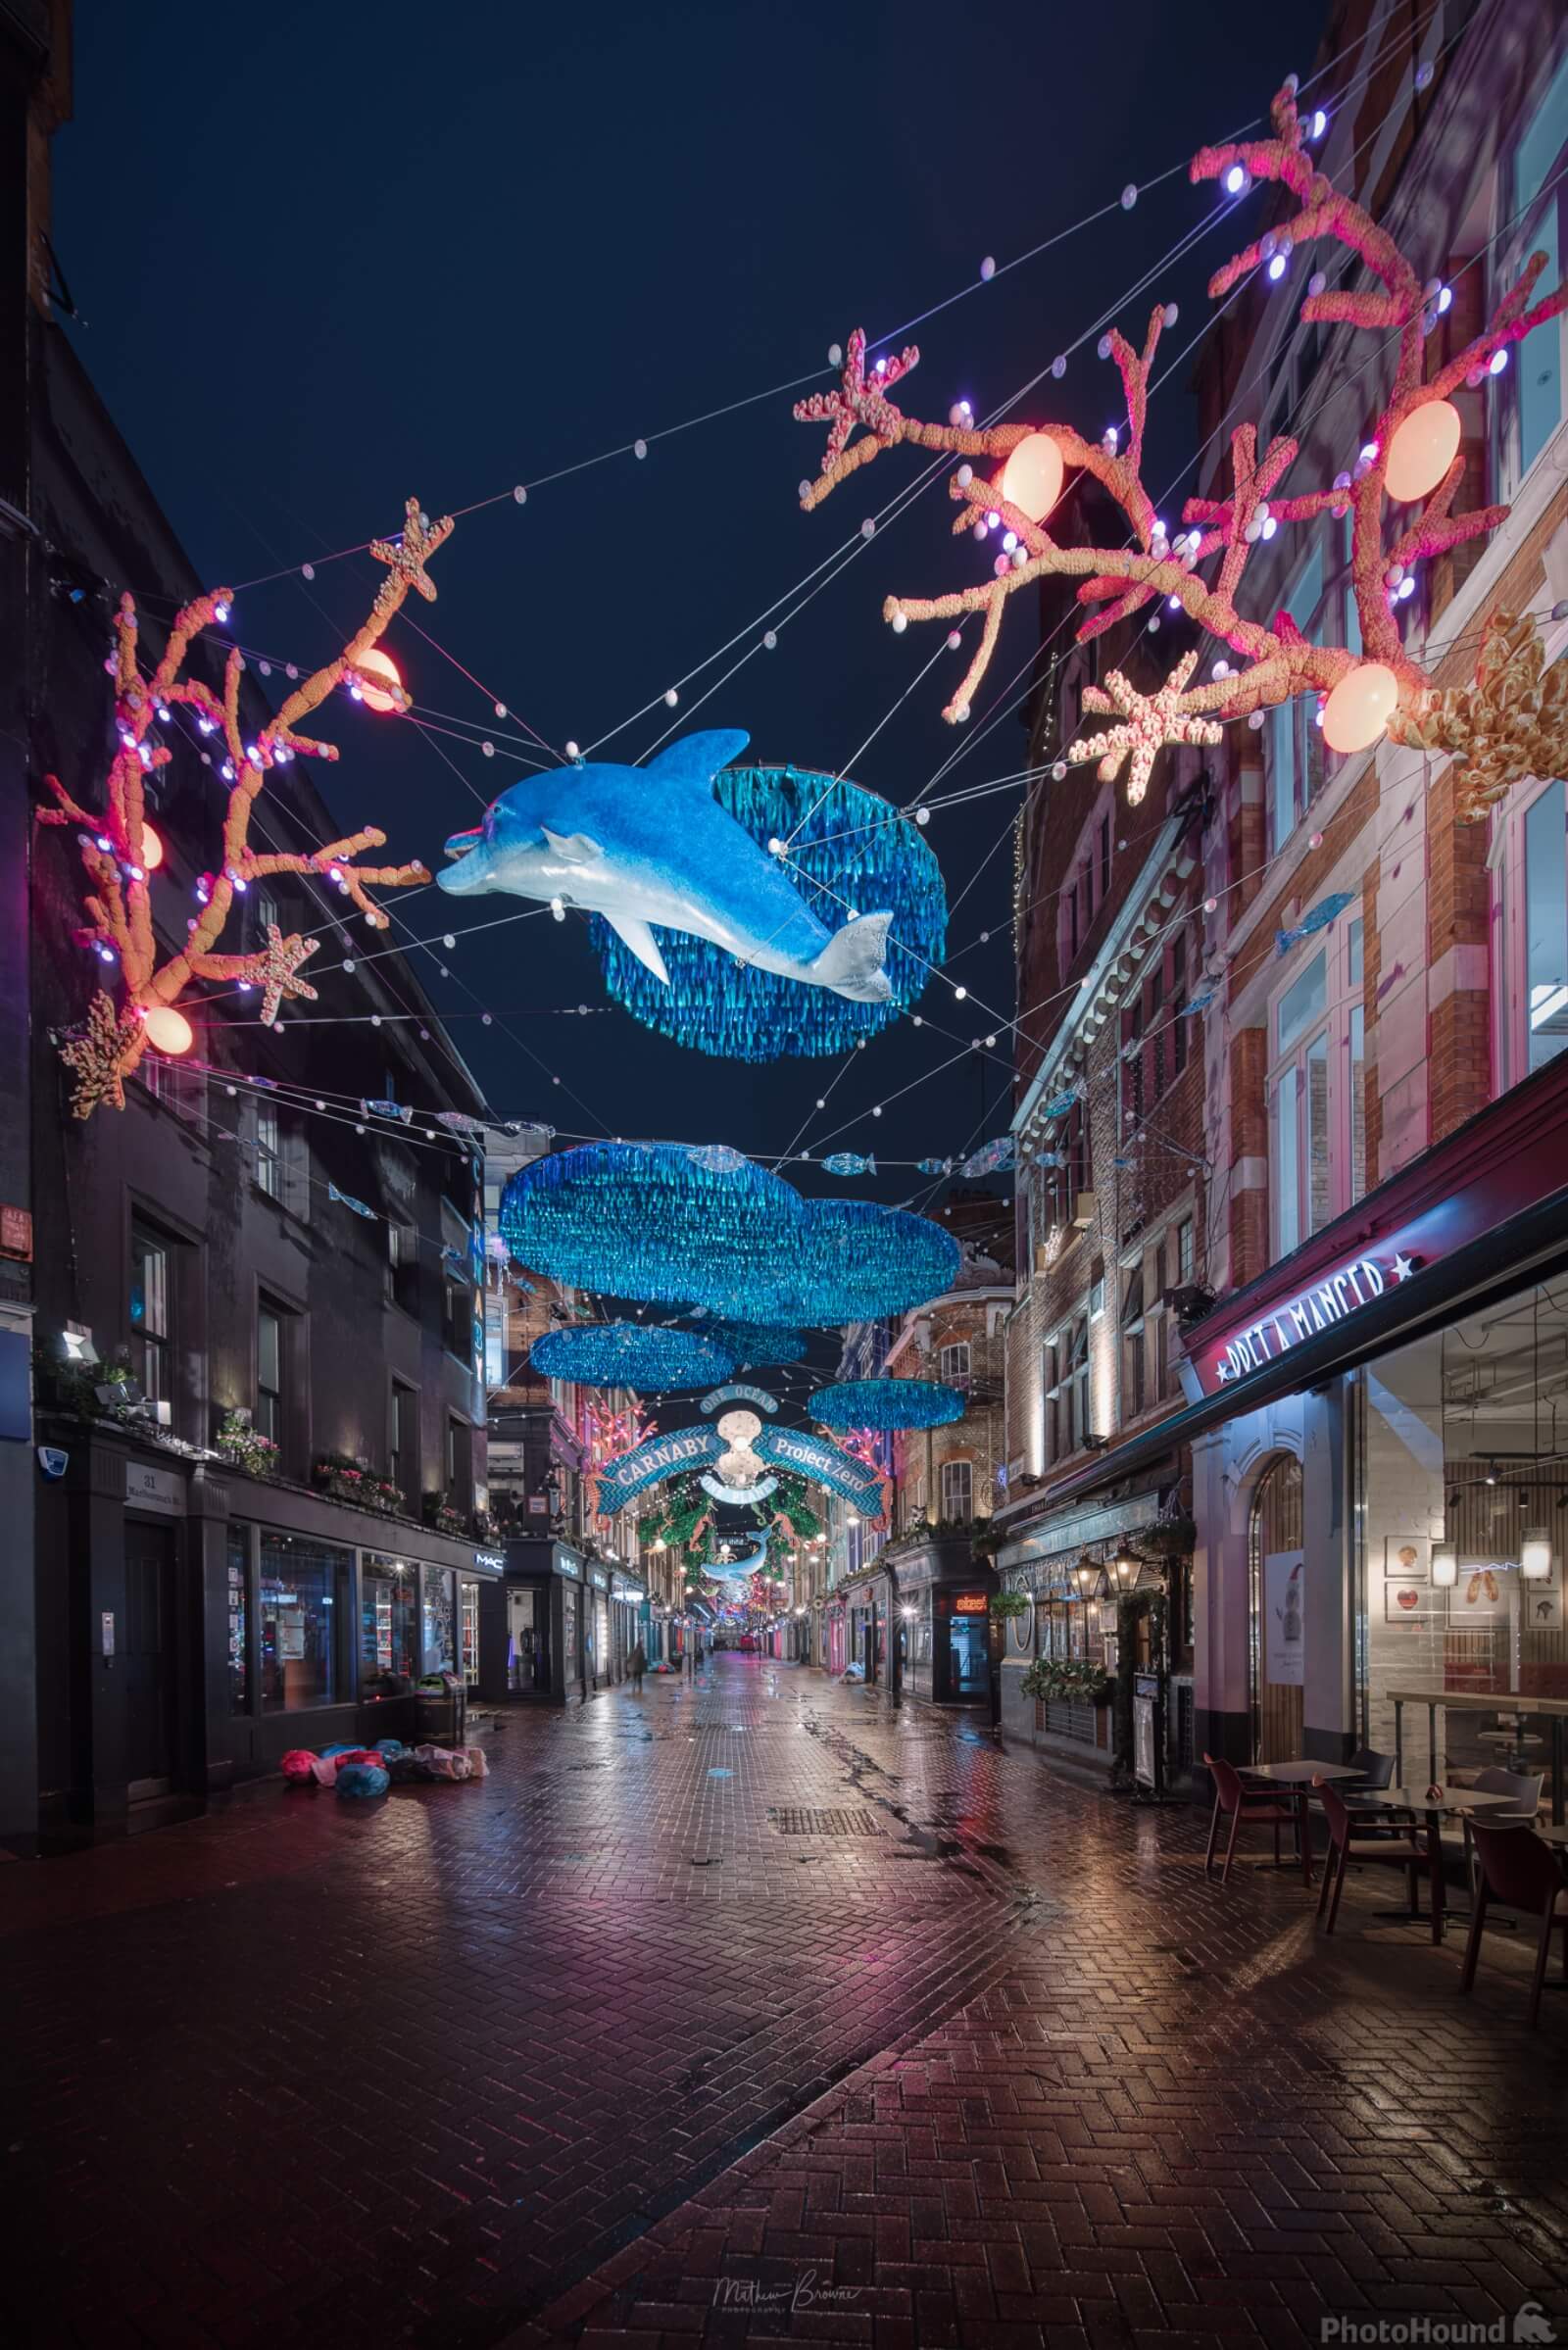 Image of Carnaby Street by Mathew Browne